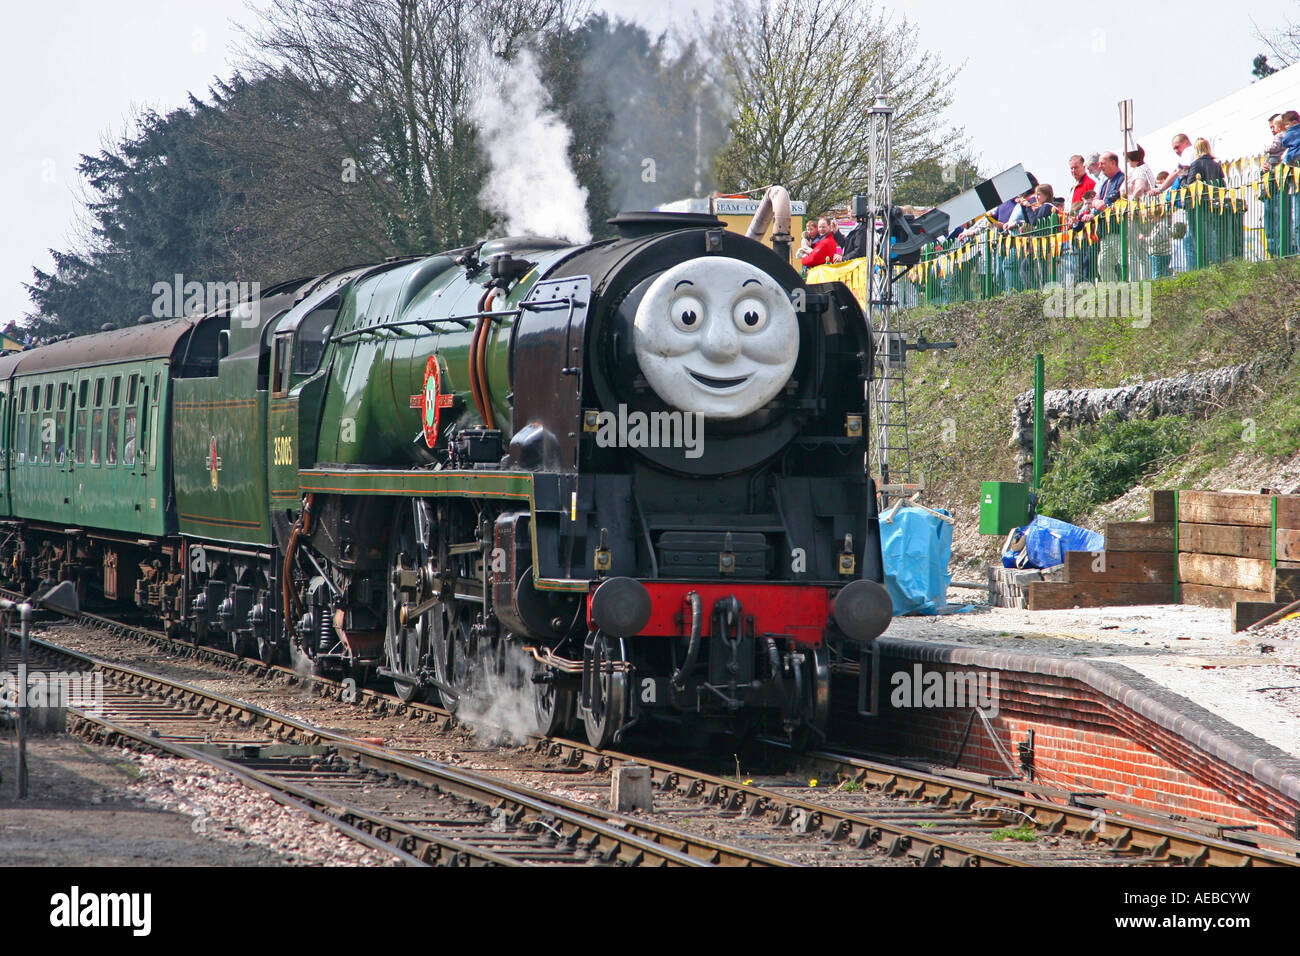 Western Pacific steam locomotive with Thomas the Tank engine-style face Stock Photo